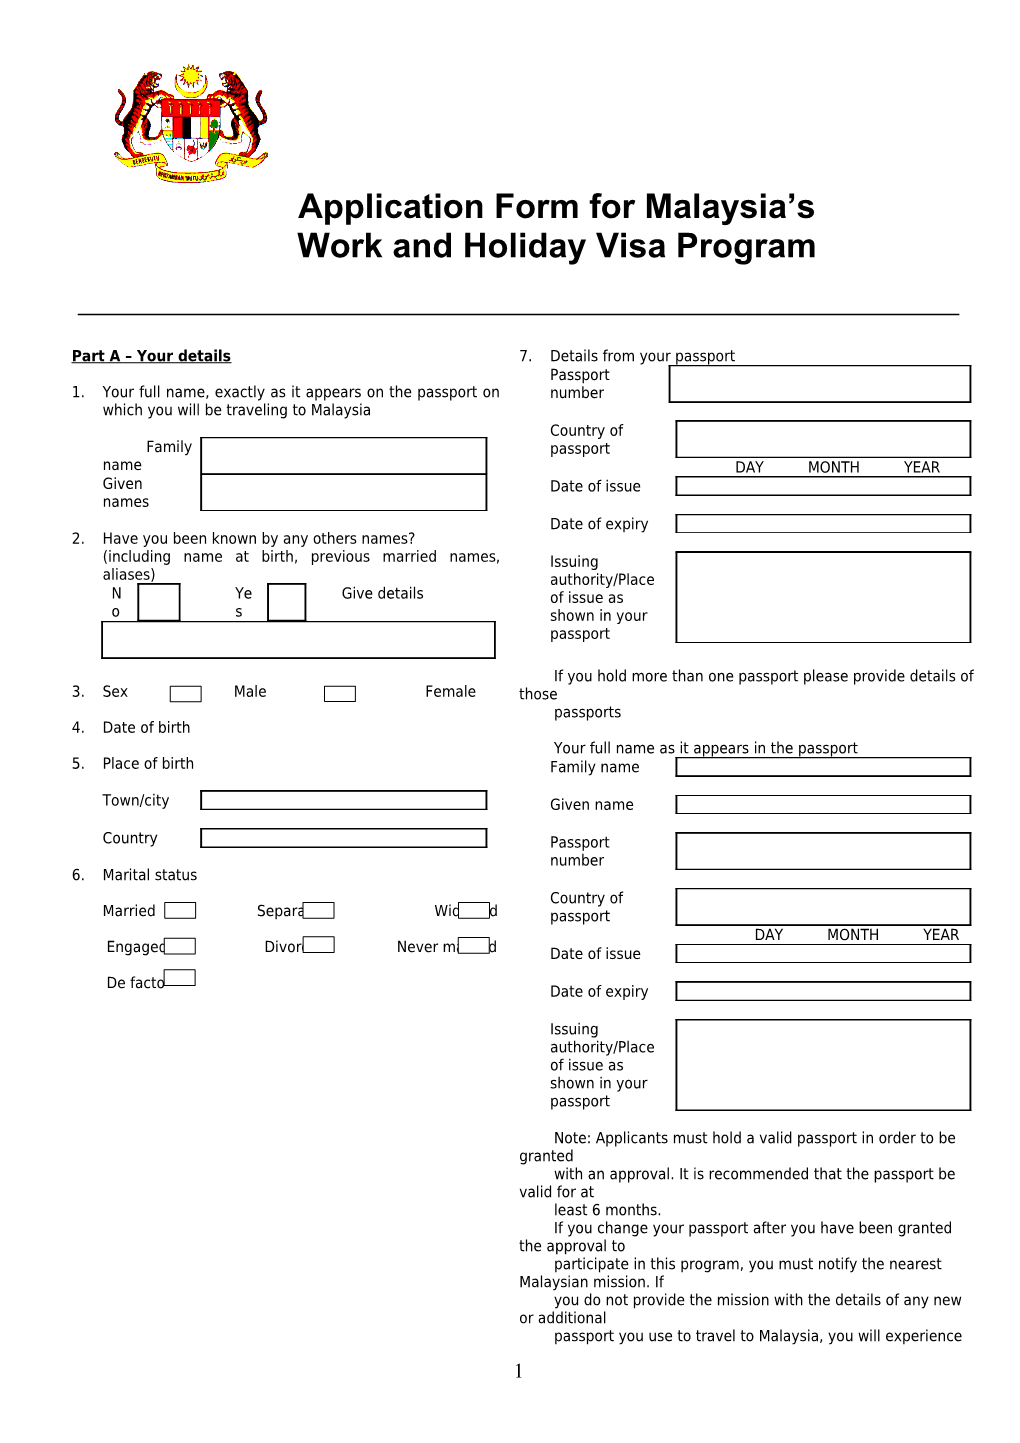 Application Form For The Malaysia’S